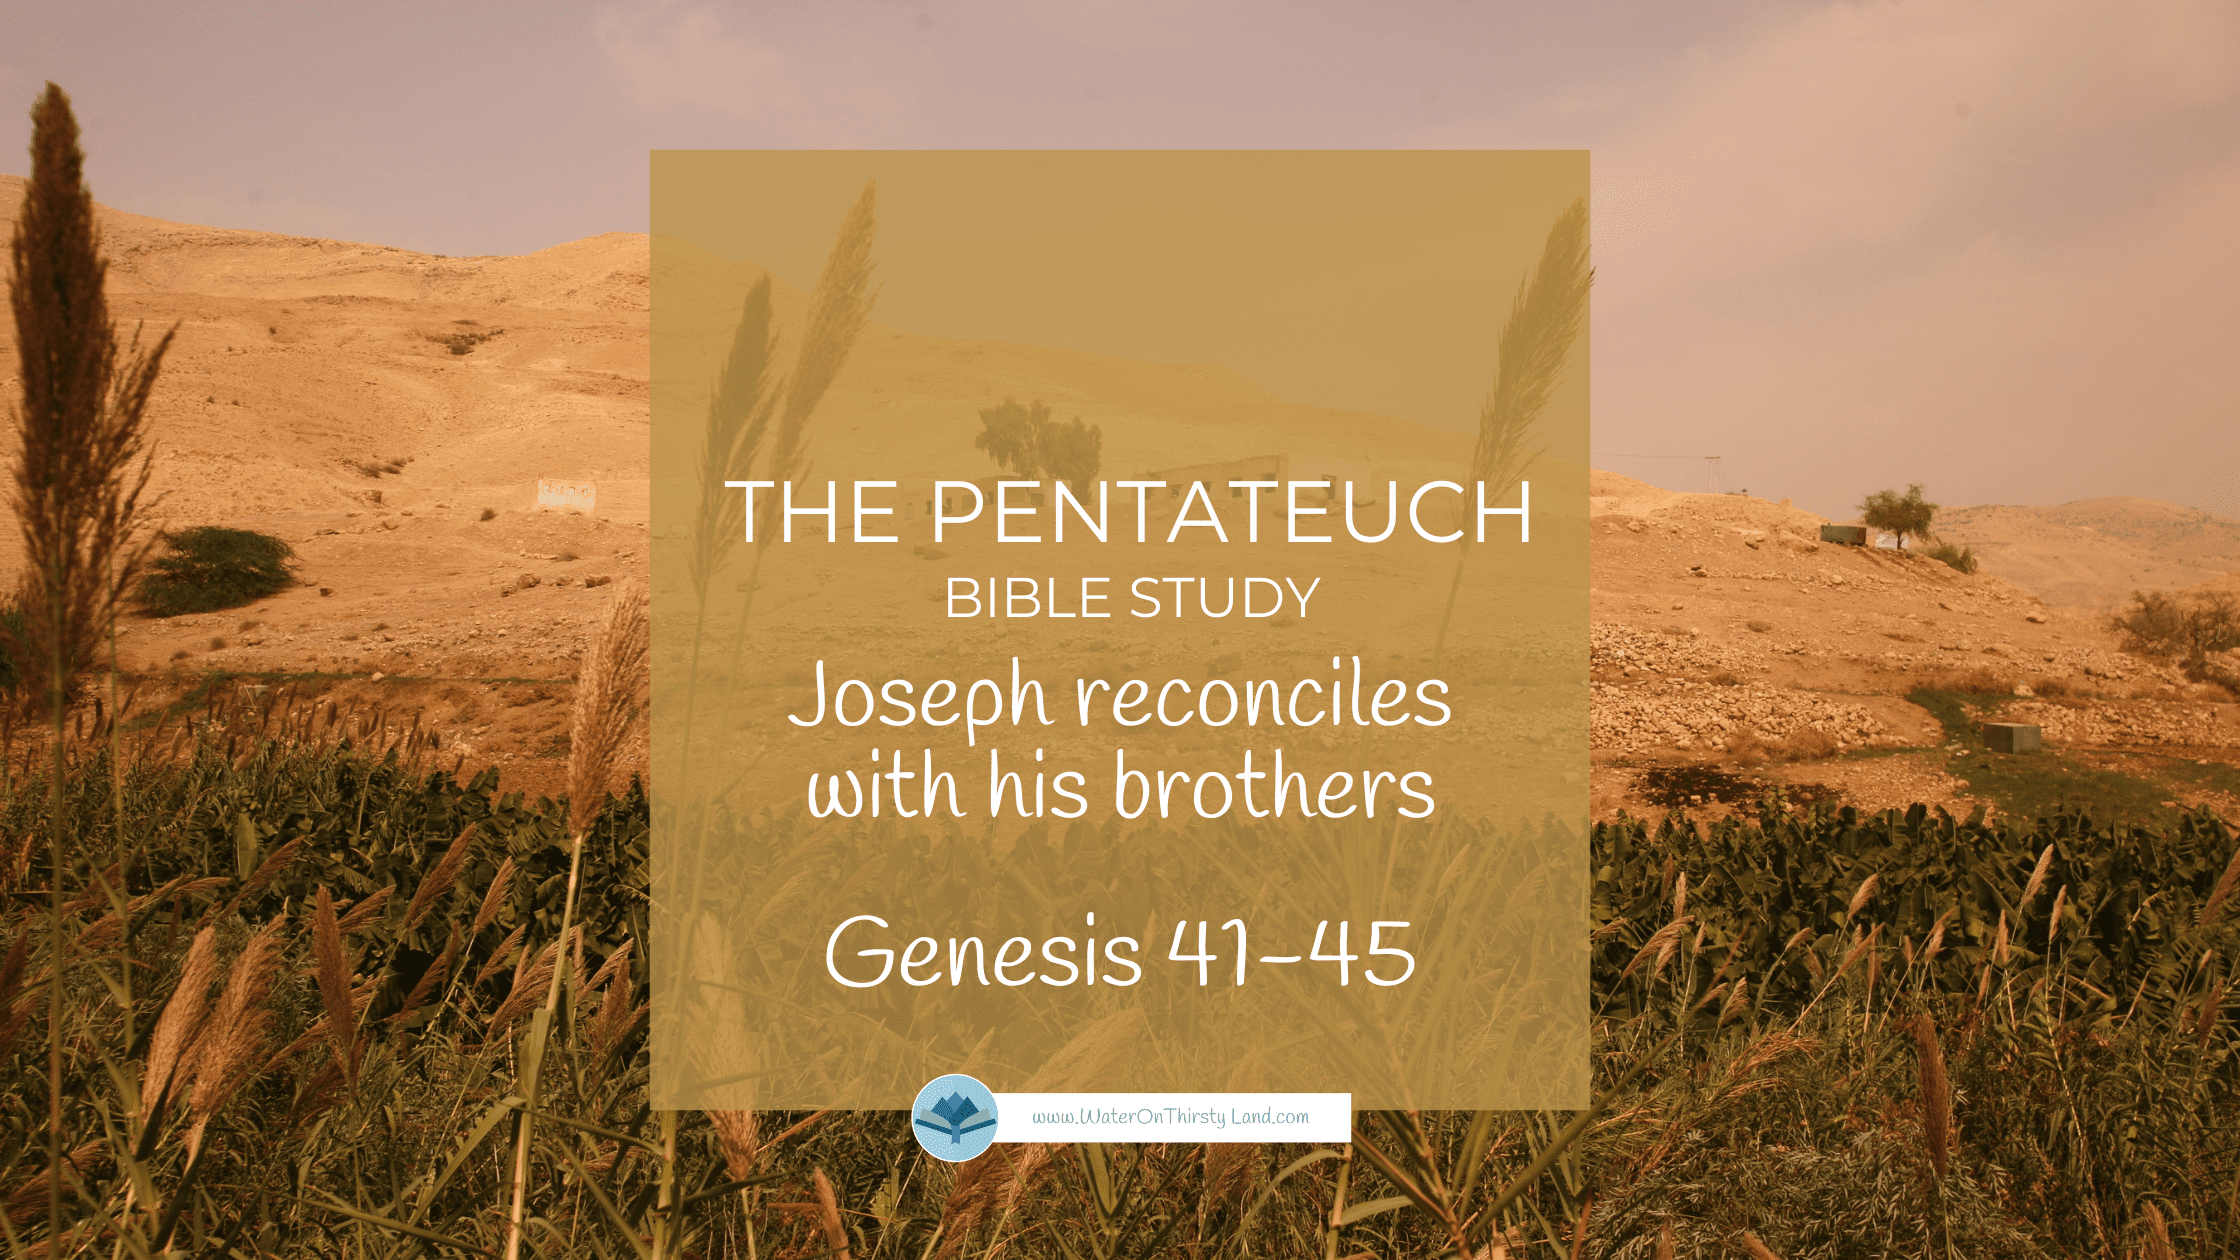 The Pentateuch: Joseph reconciles with his brothers, Genesis 41-45